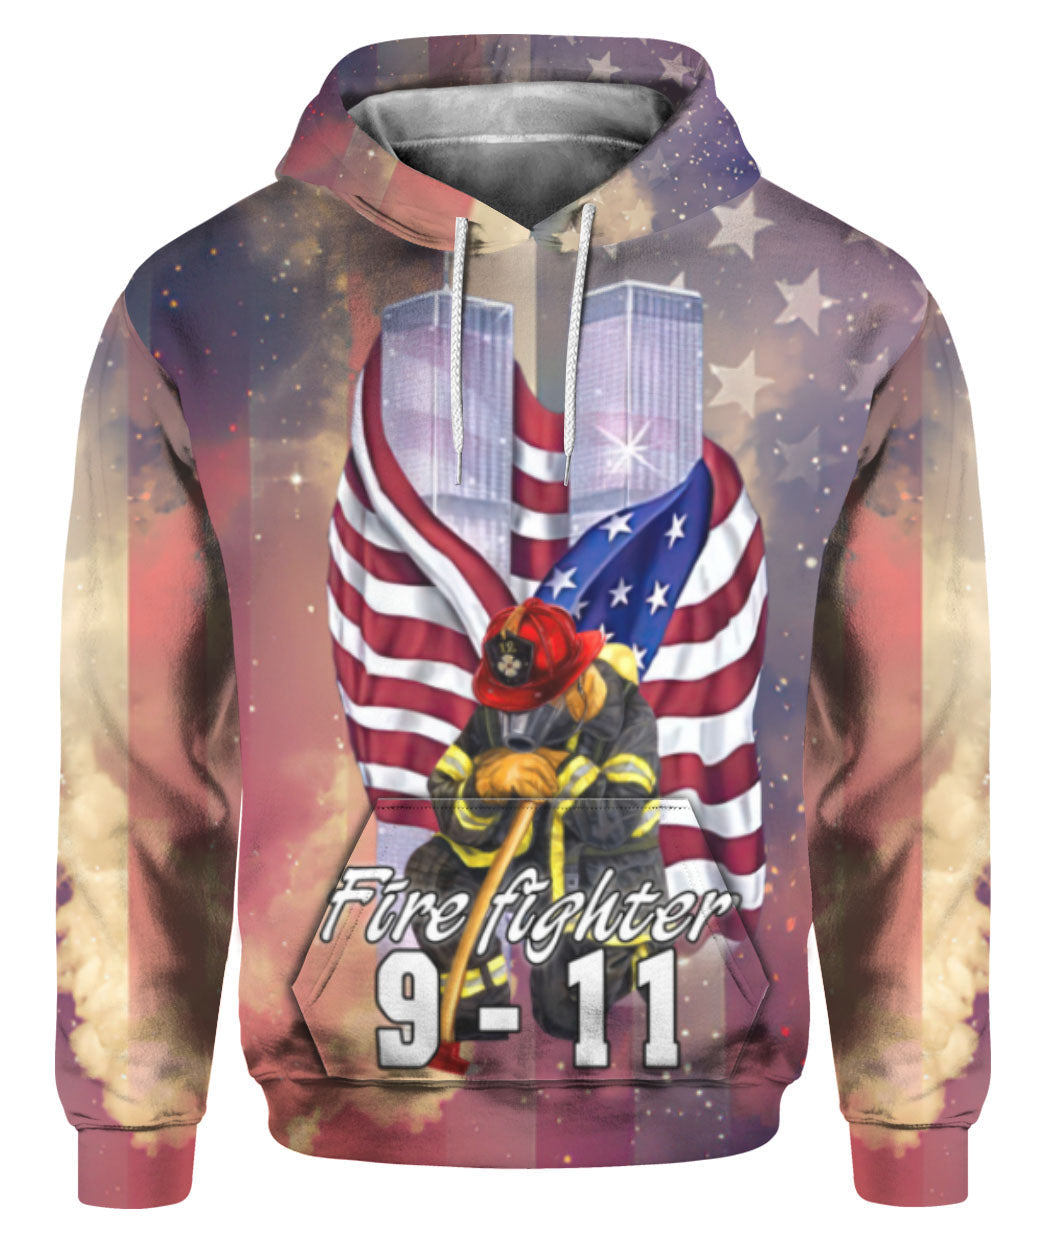 911 All Gave Some Some Gave All Hoodie For Men & Women